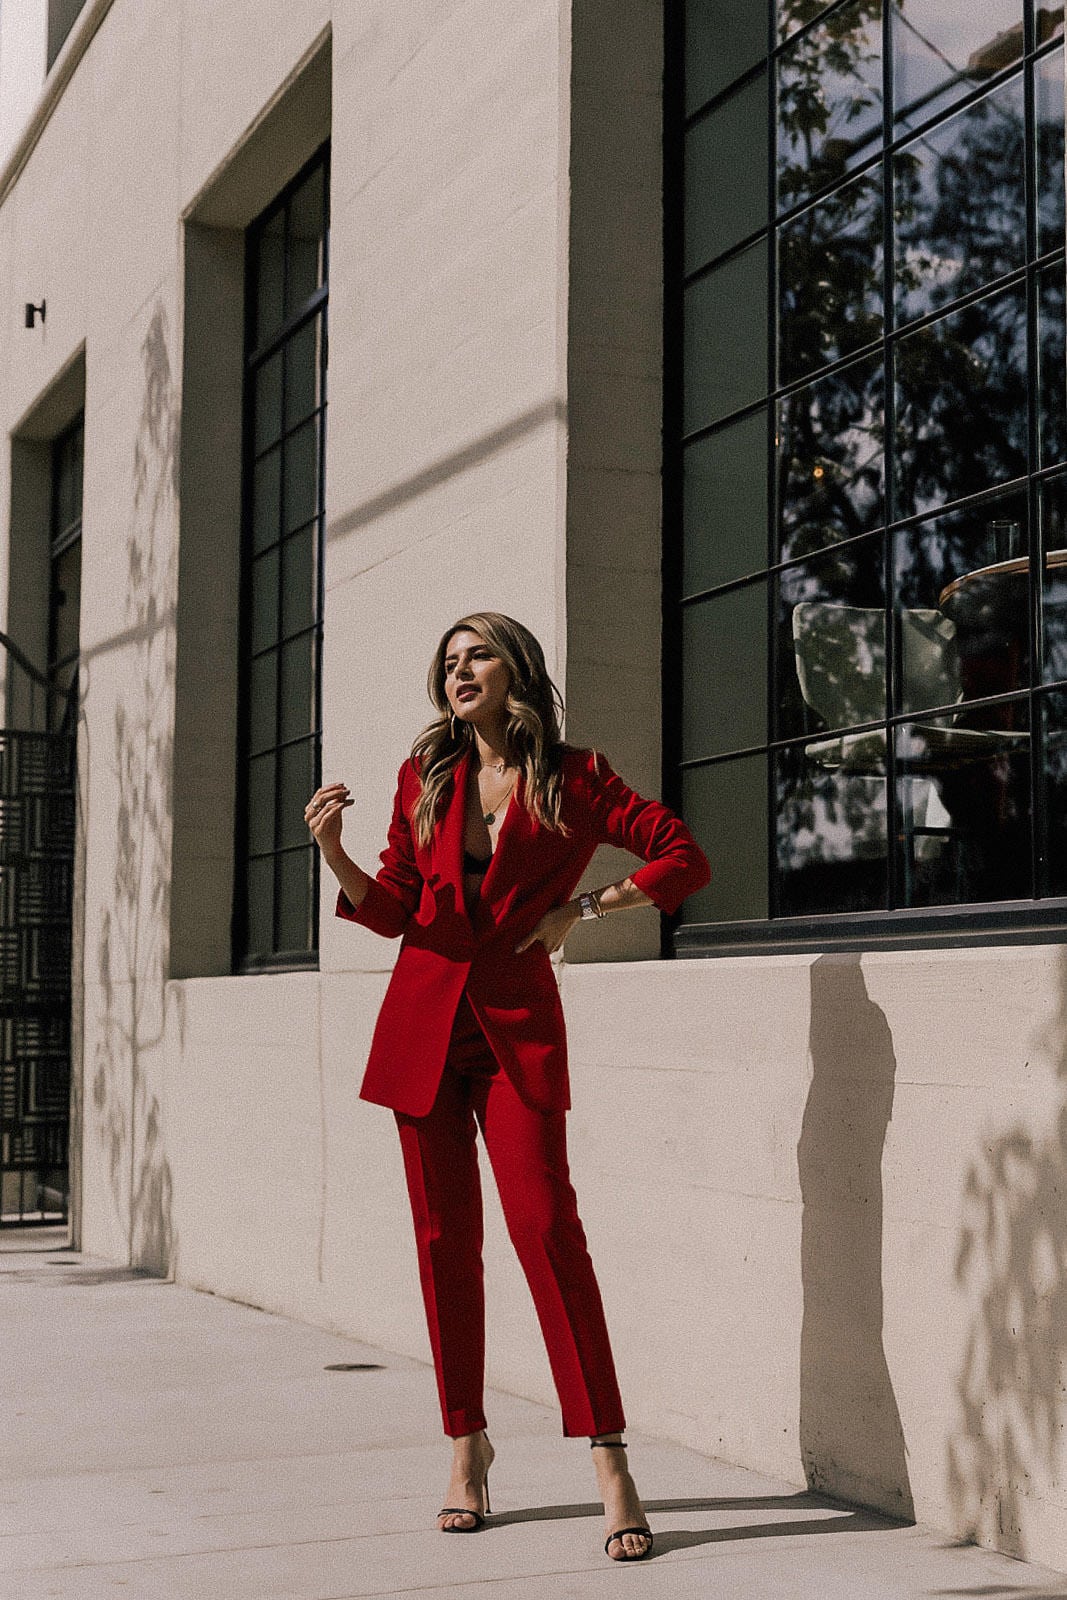 Pam Hetlinger Outfits, Red Power Suit, Trouser Suit Trend, Street Style | TheGirlFromPanama.com